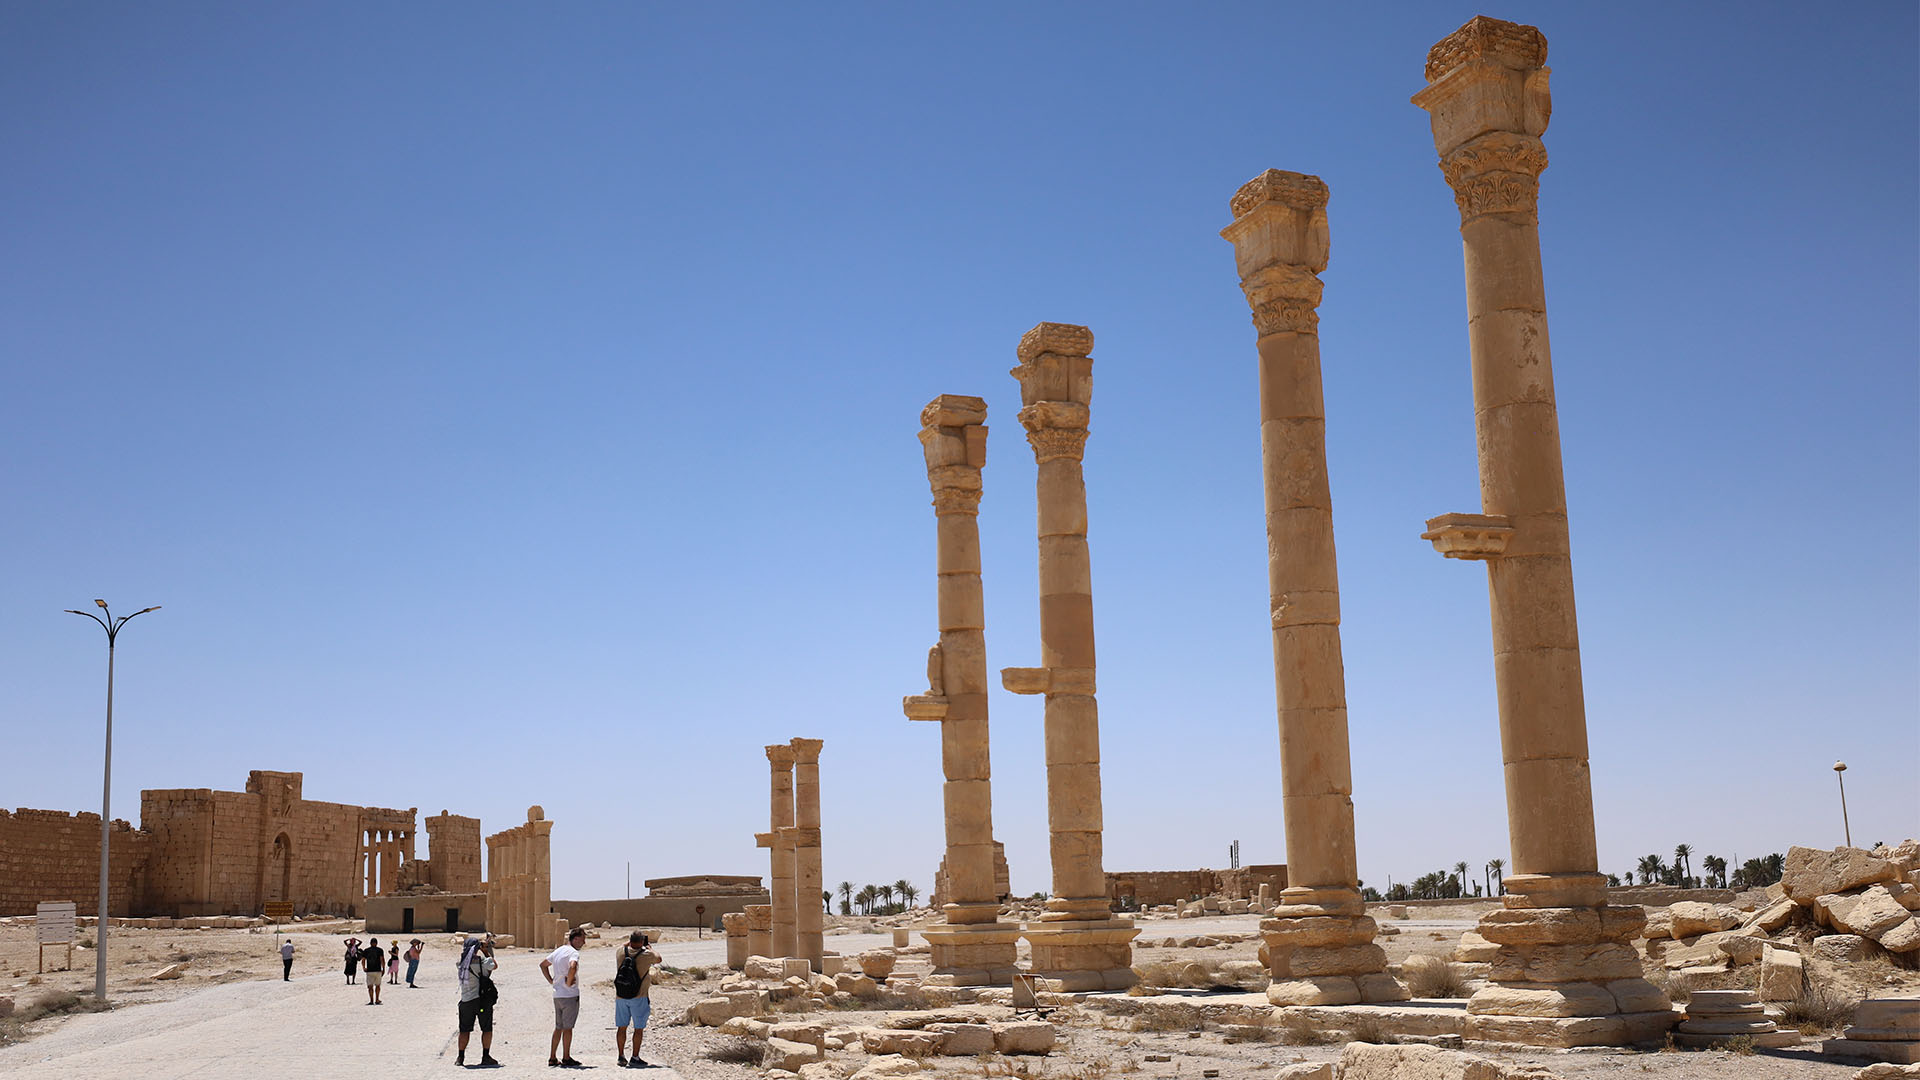 Americans exploring the historic city of Palmyra, with the colossal columns towering beside them.